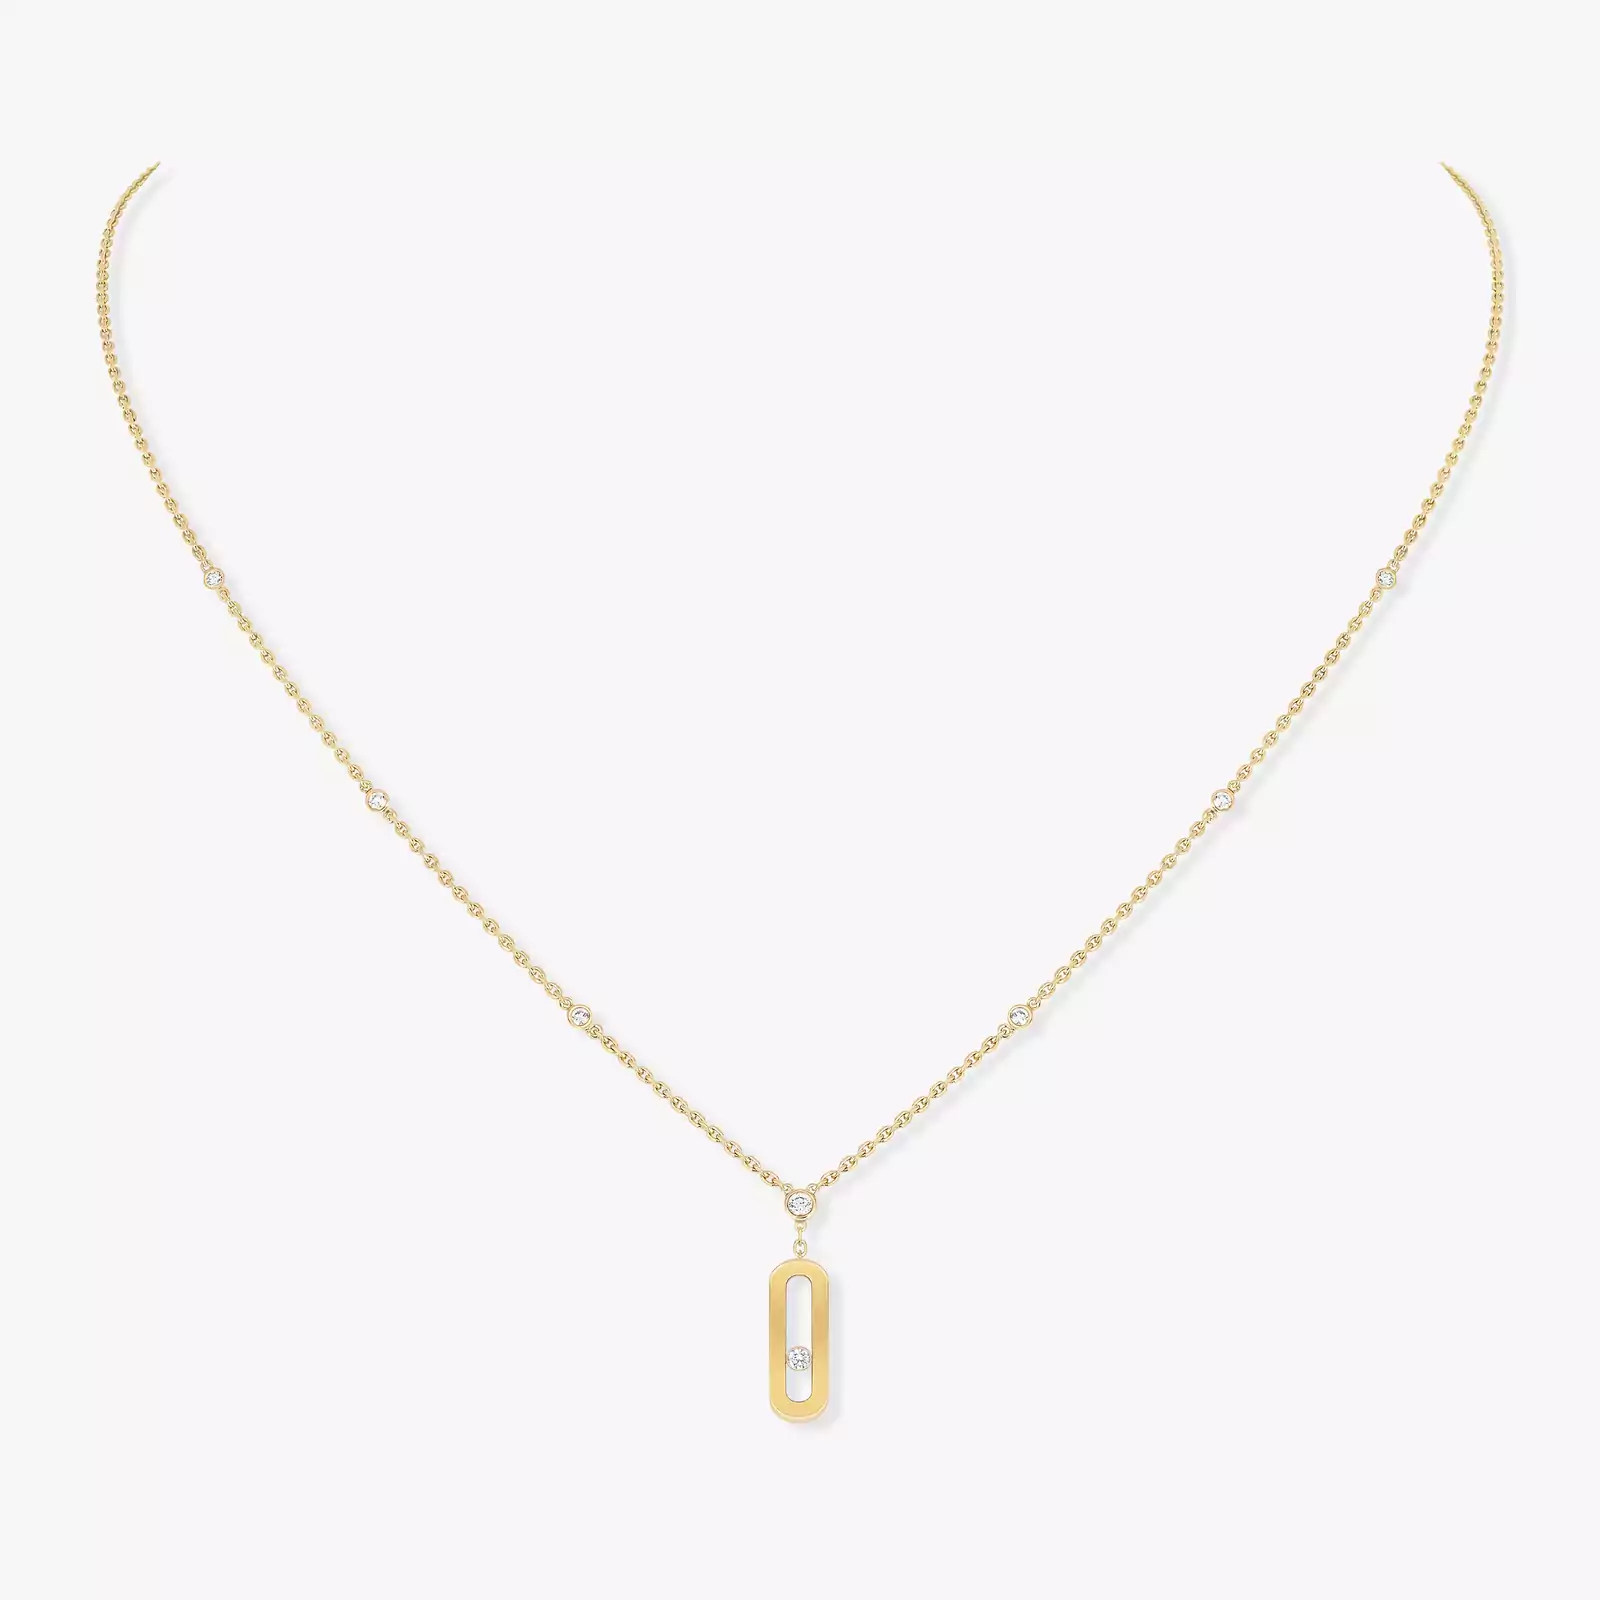 Collier Femme Or Jaune Diamant Collier Long Move Uno 10111-YG